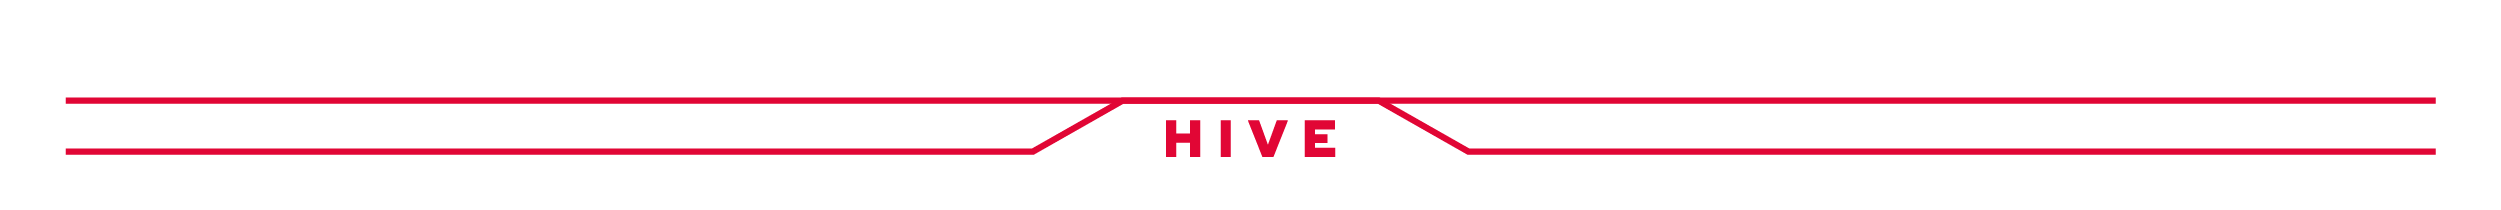 hive_dividers_10.png